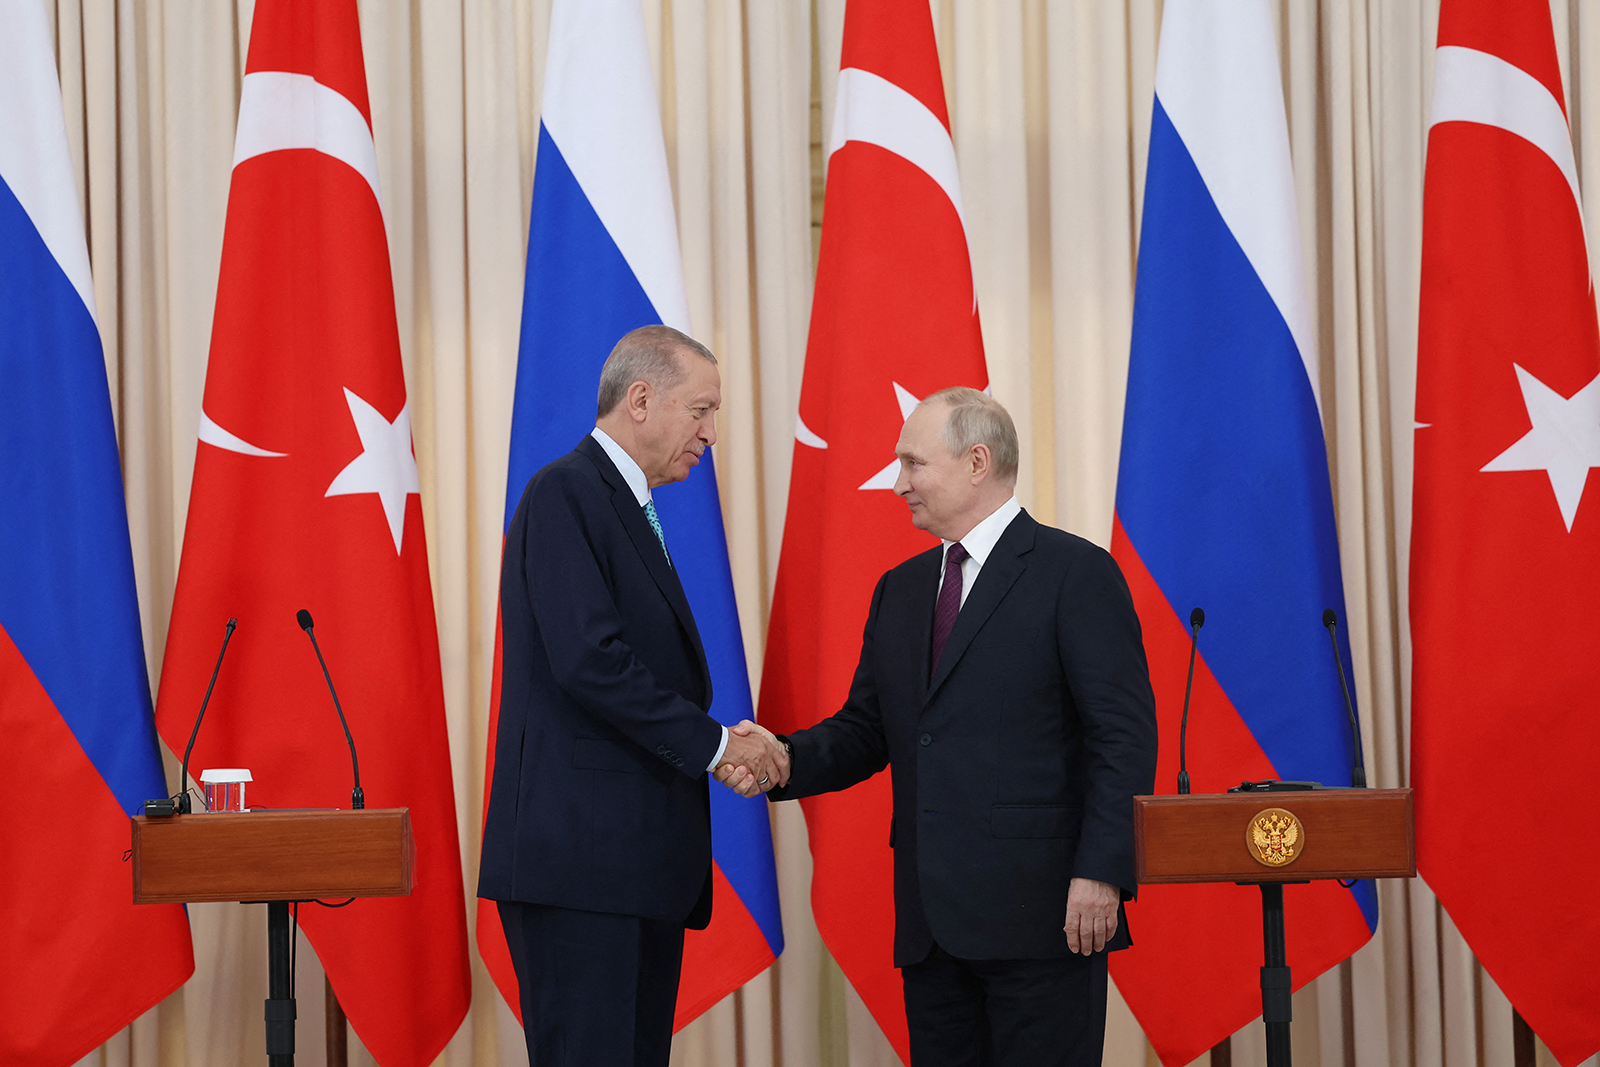 Recep Tayyip Erdogan shakes hands with his Russian counterpart Vladimir Putin during a press conference in Sochi, Russia on September 4.